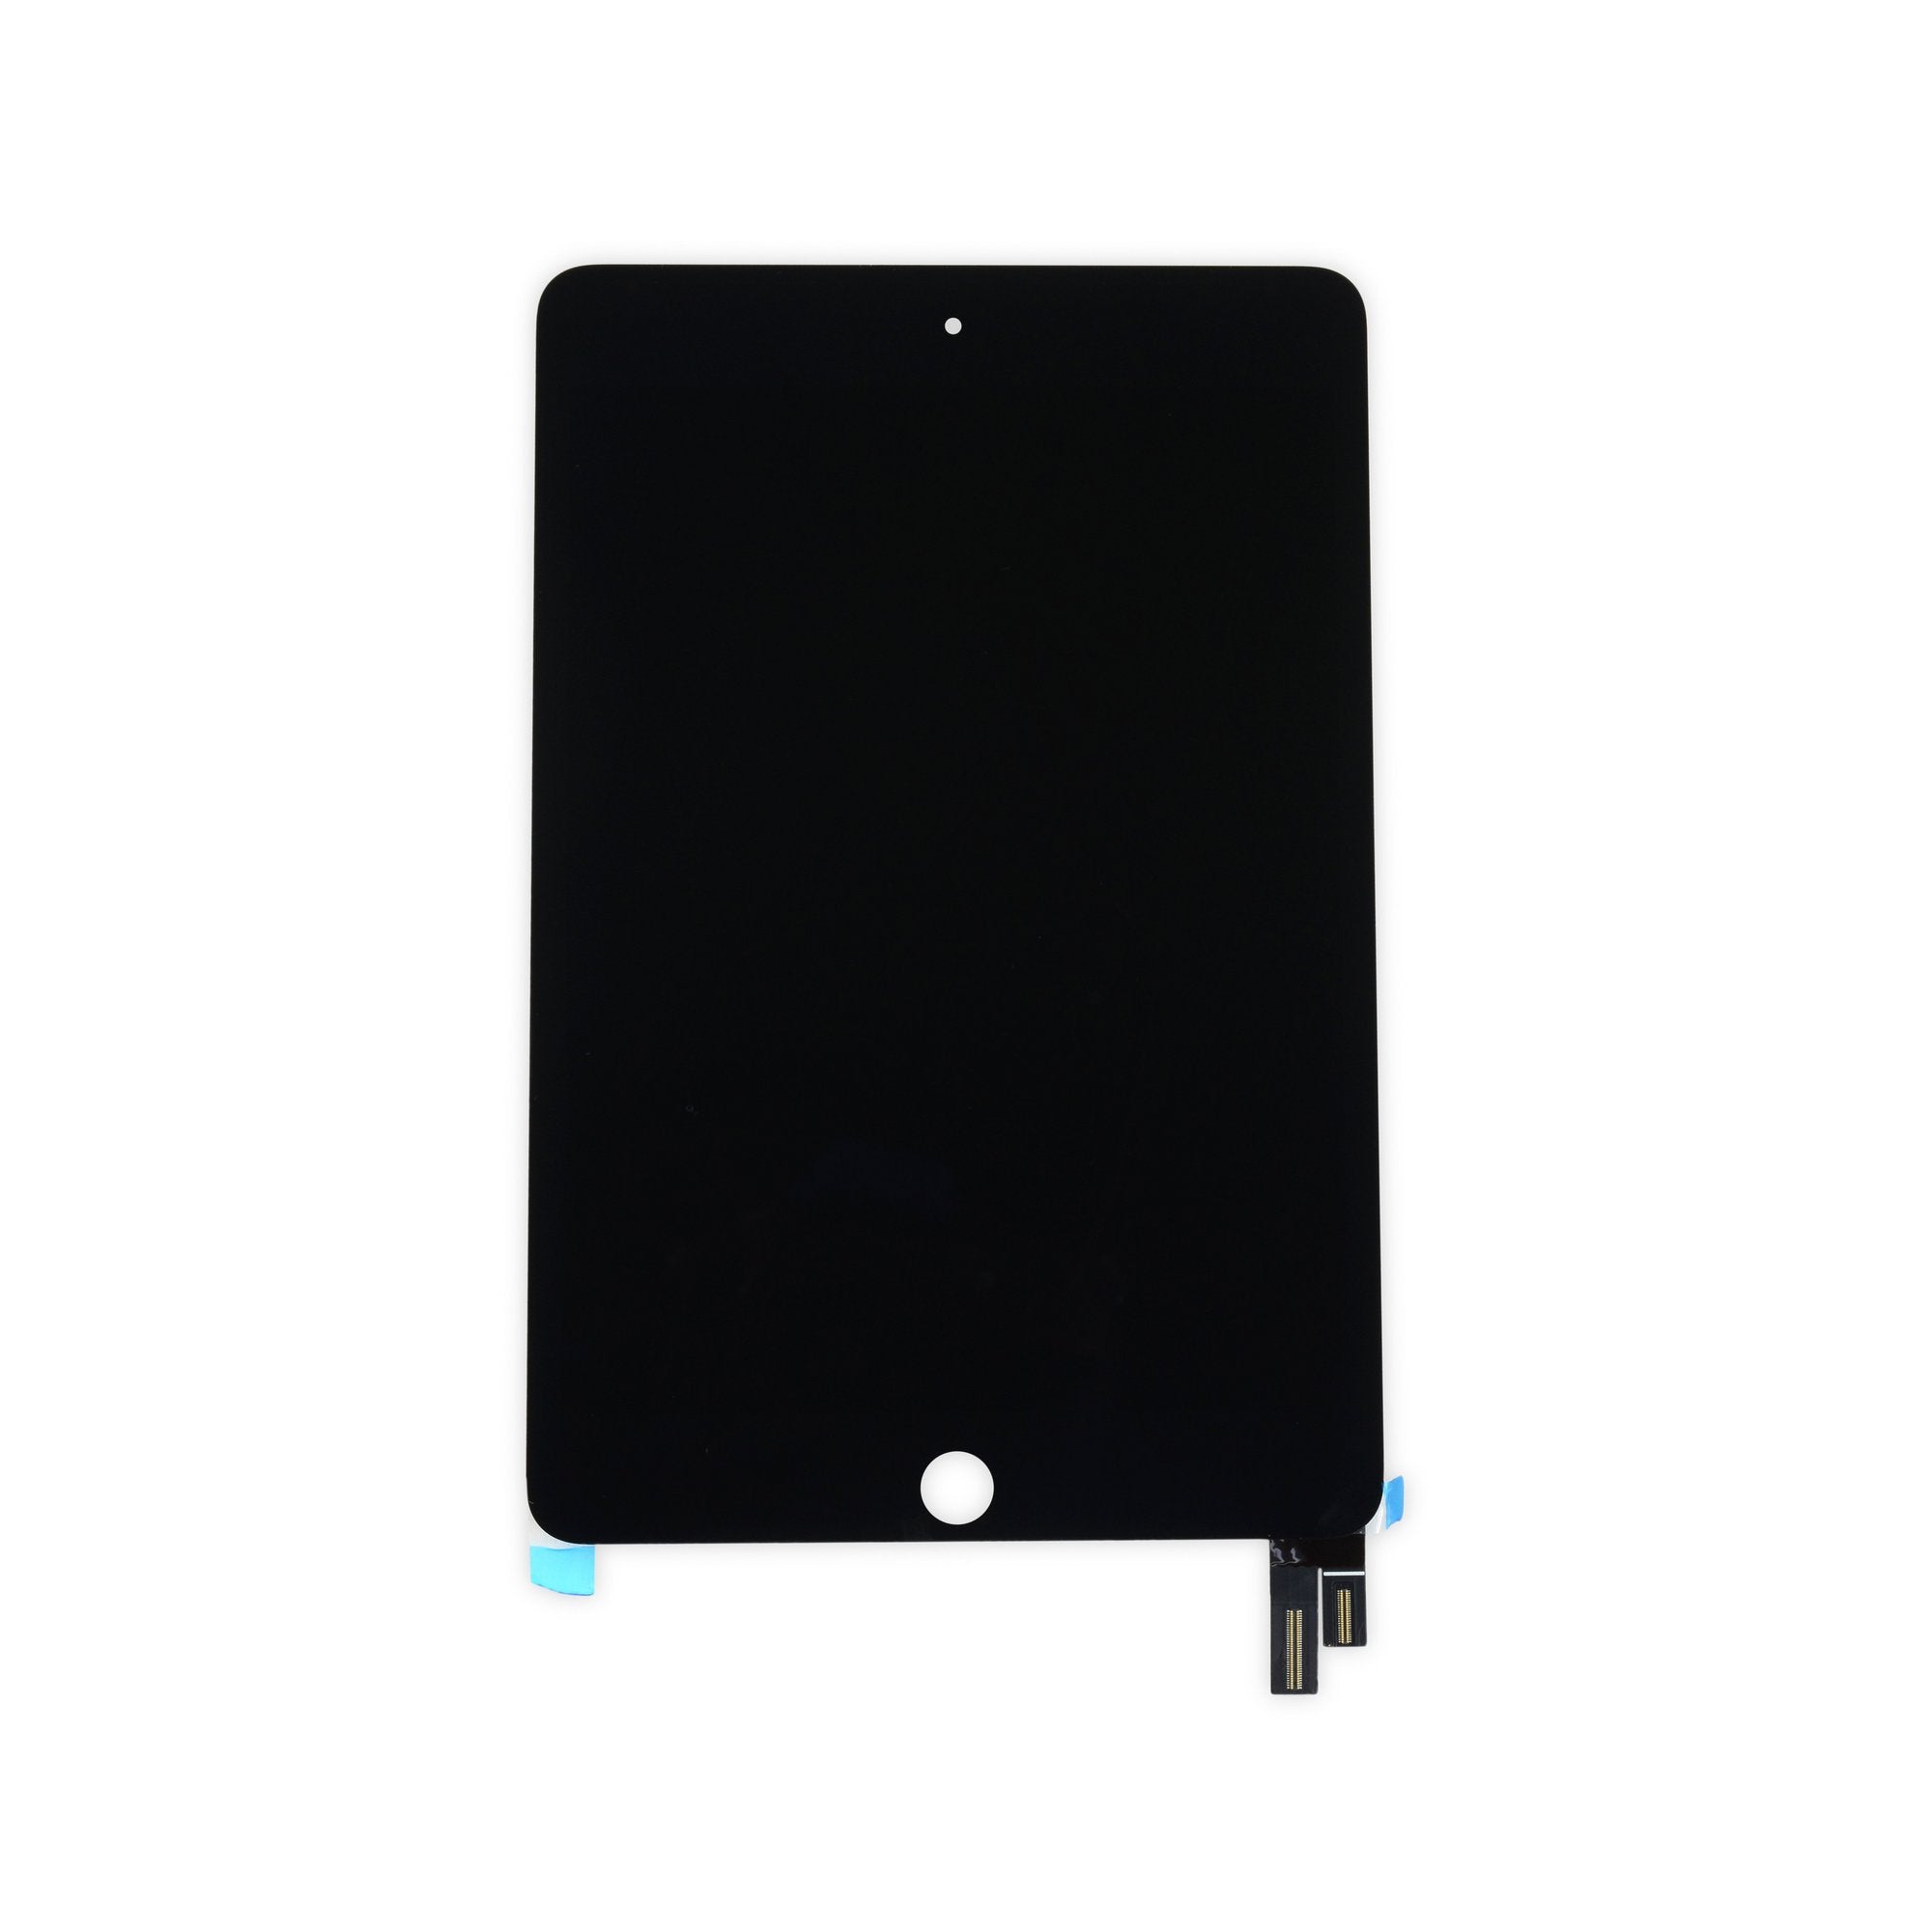  New Screen Replacement For iPad mini 4 7.9 inch A1538 A1550  Digitizer Glass Touch Screen Replacement and Pre-Installed Adhesive with  Repair Tools Kit (Without Home Button,Not Include LCD) (Black) : Electronics